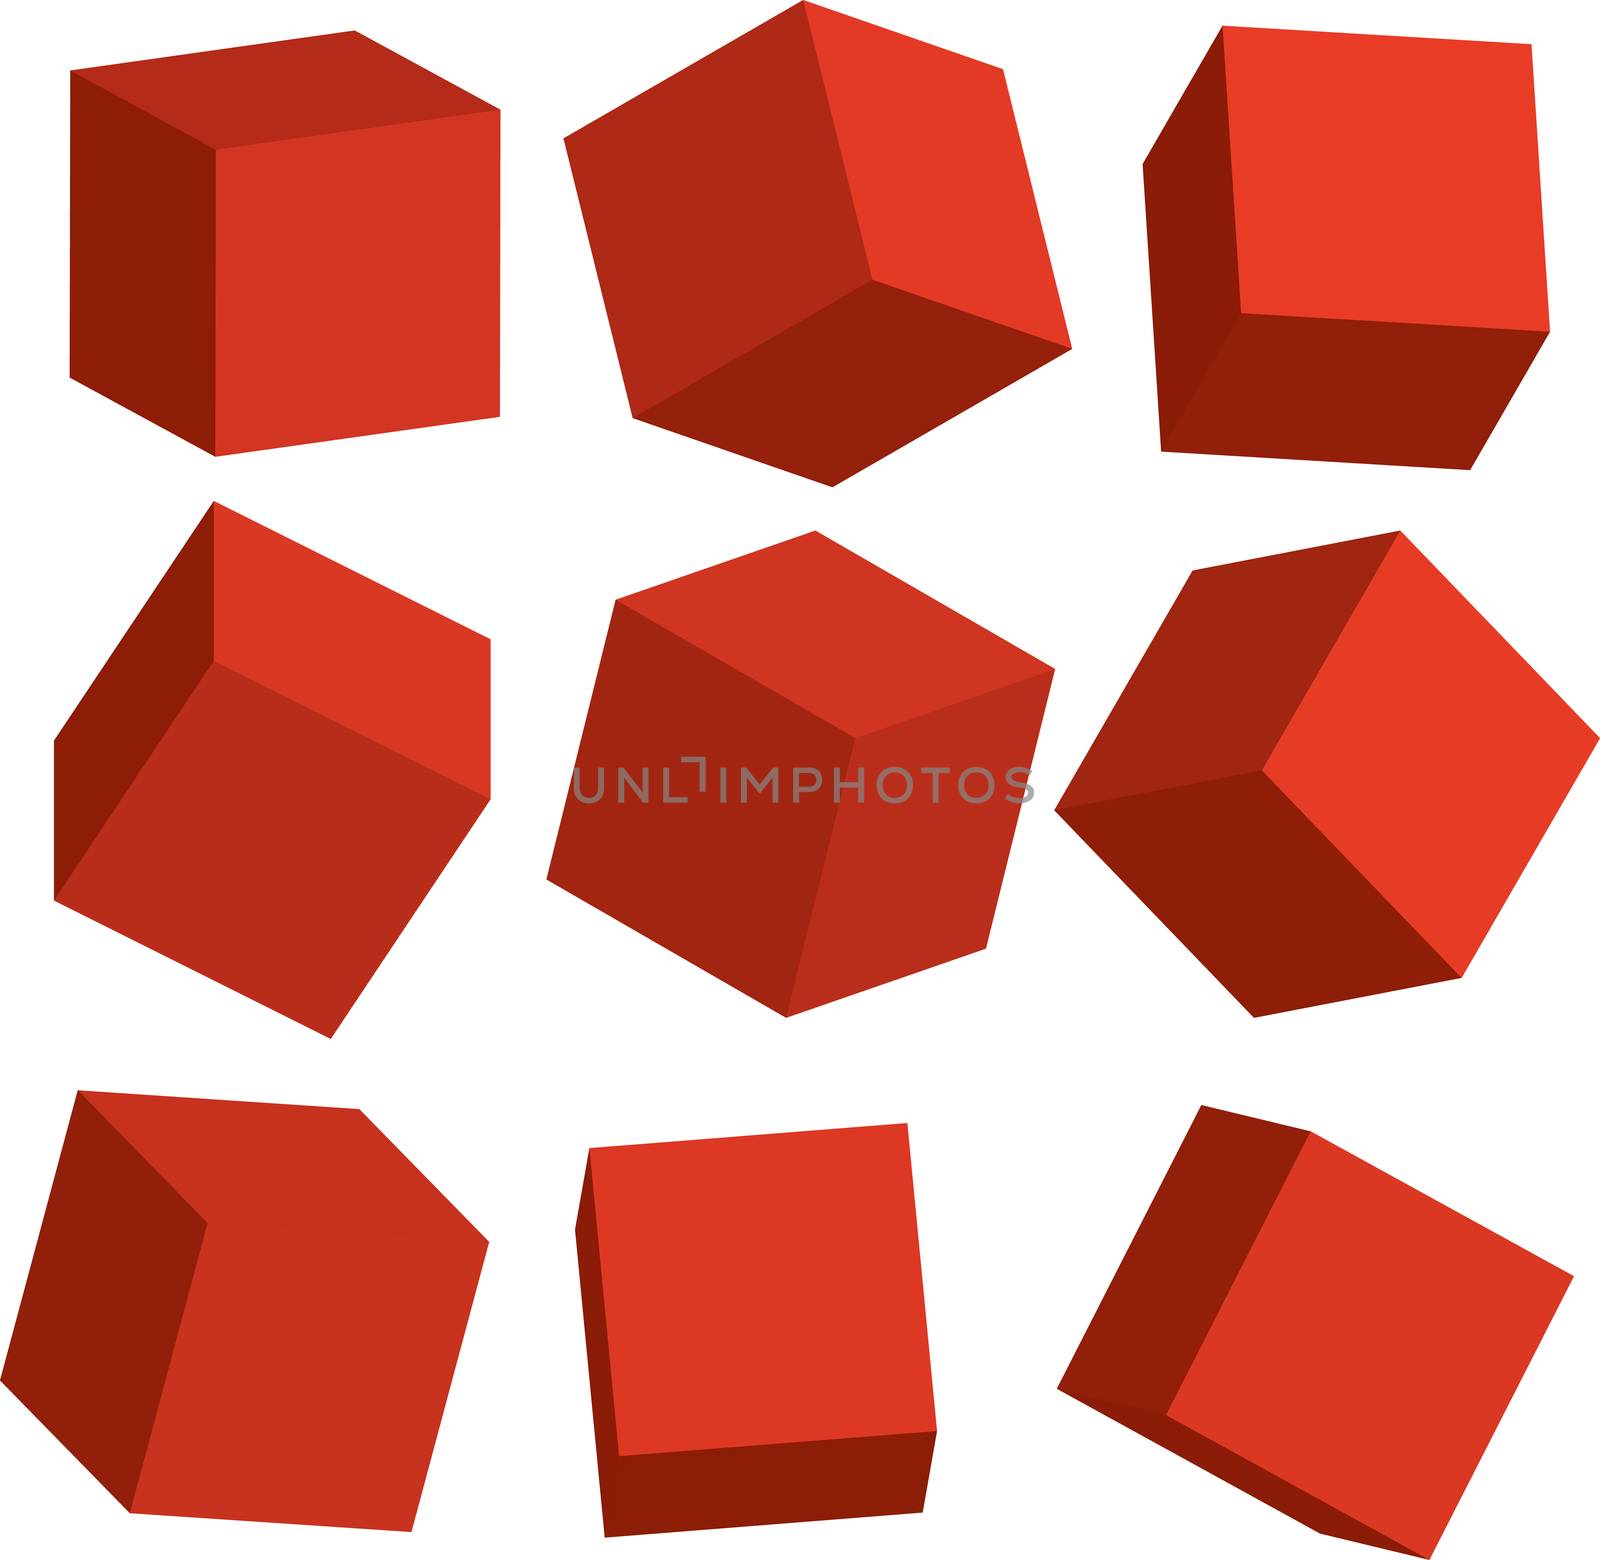 An Illustration of Red 3D cubes in different positions